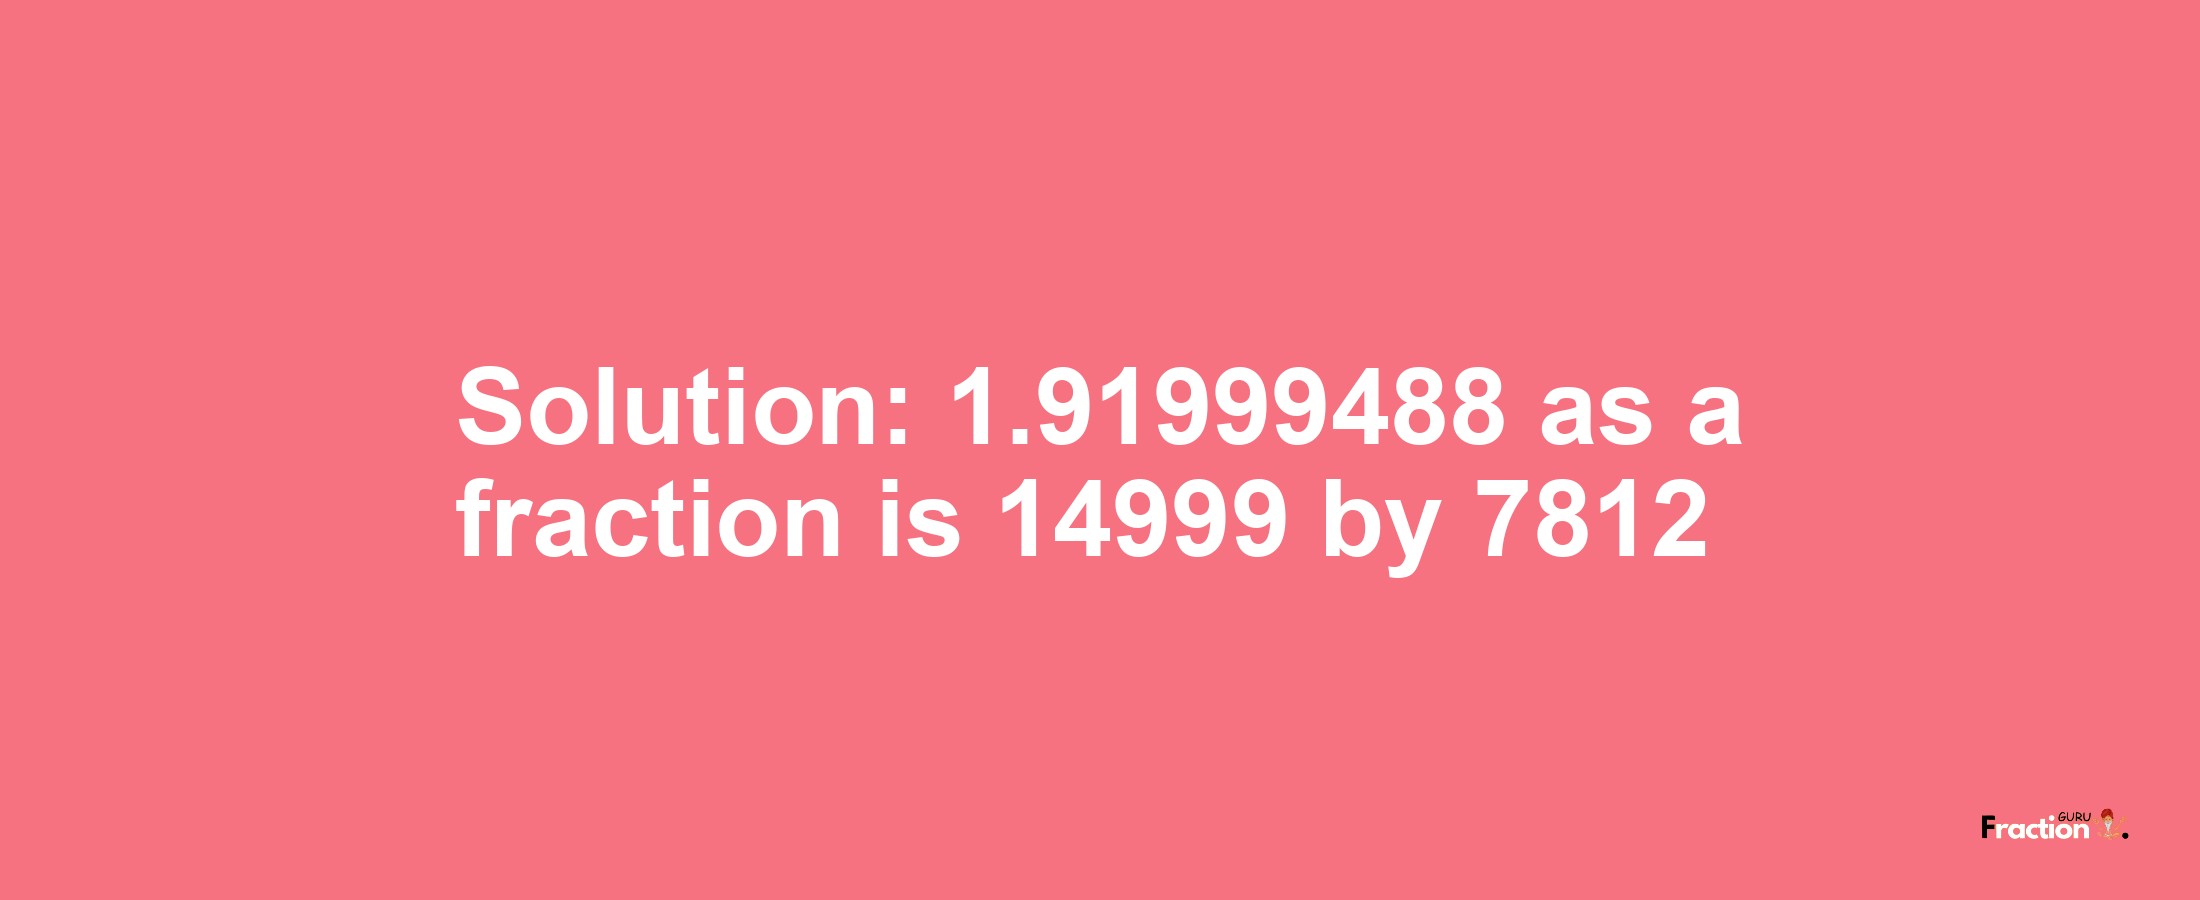 Solution:1.91999488 as a fraction is 14999/7812